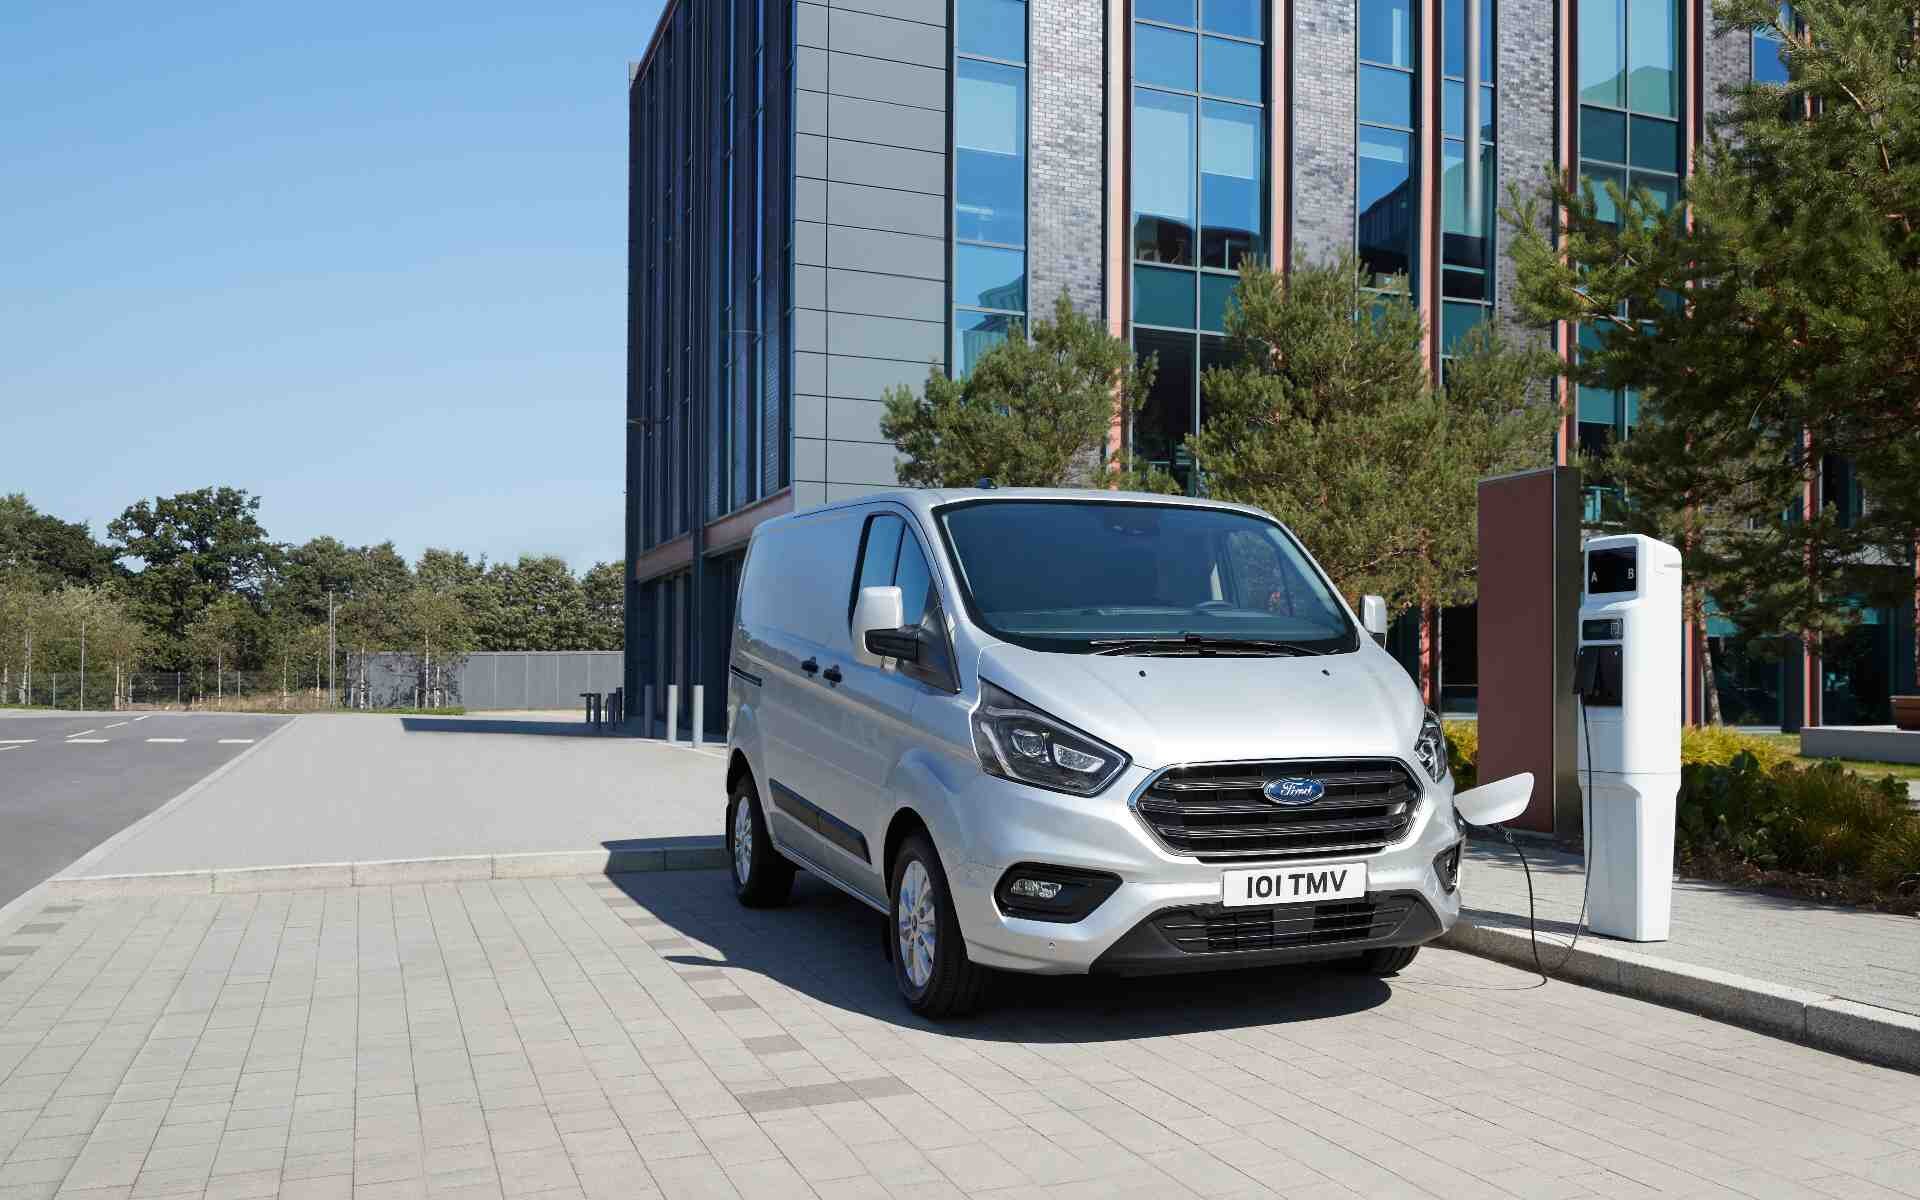 Ford Transit Custom PHEV - no longer qualifies for the grant